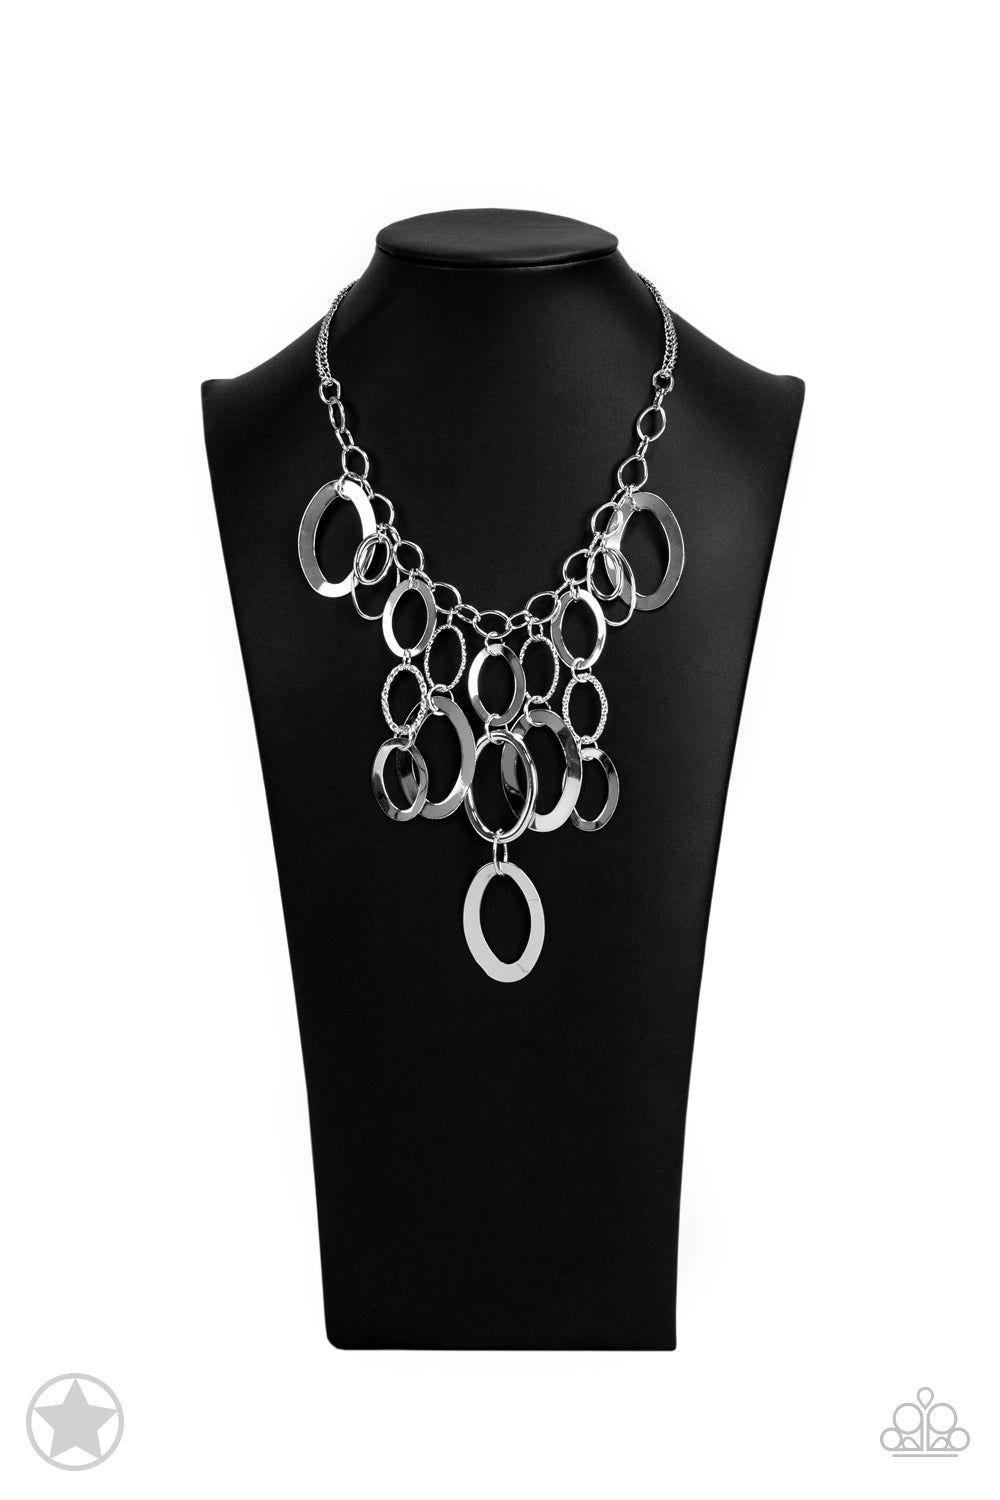 A Silver Spell - Silver Necklace - Paparazzi Accessories - Large silver links and shimmering textured silver rings cascade below a silver chain freely, allowing for movement that makes a bold statement. Features an adjustable clasp closure. Sold as one individual necklace.